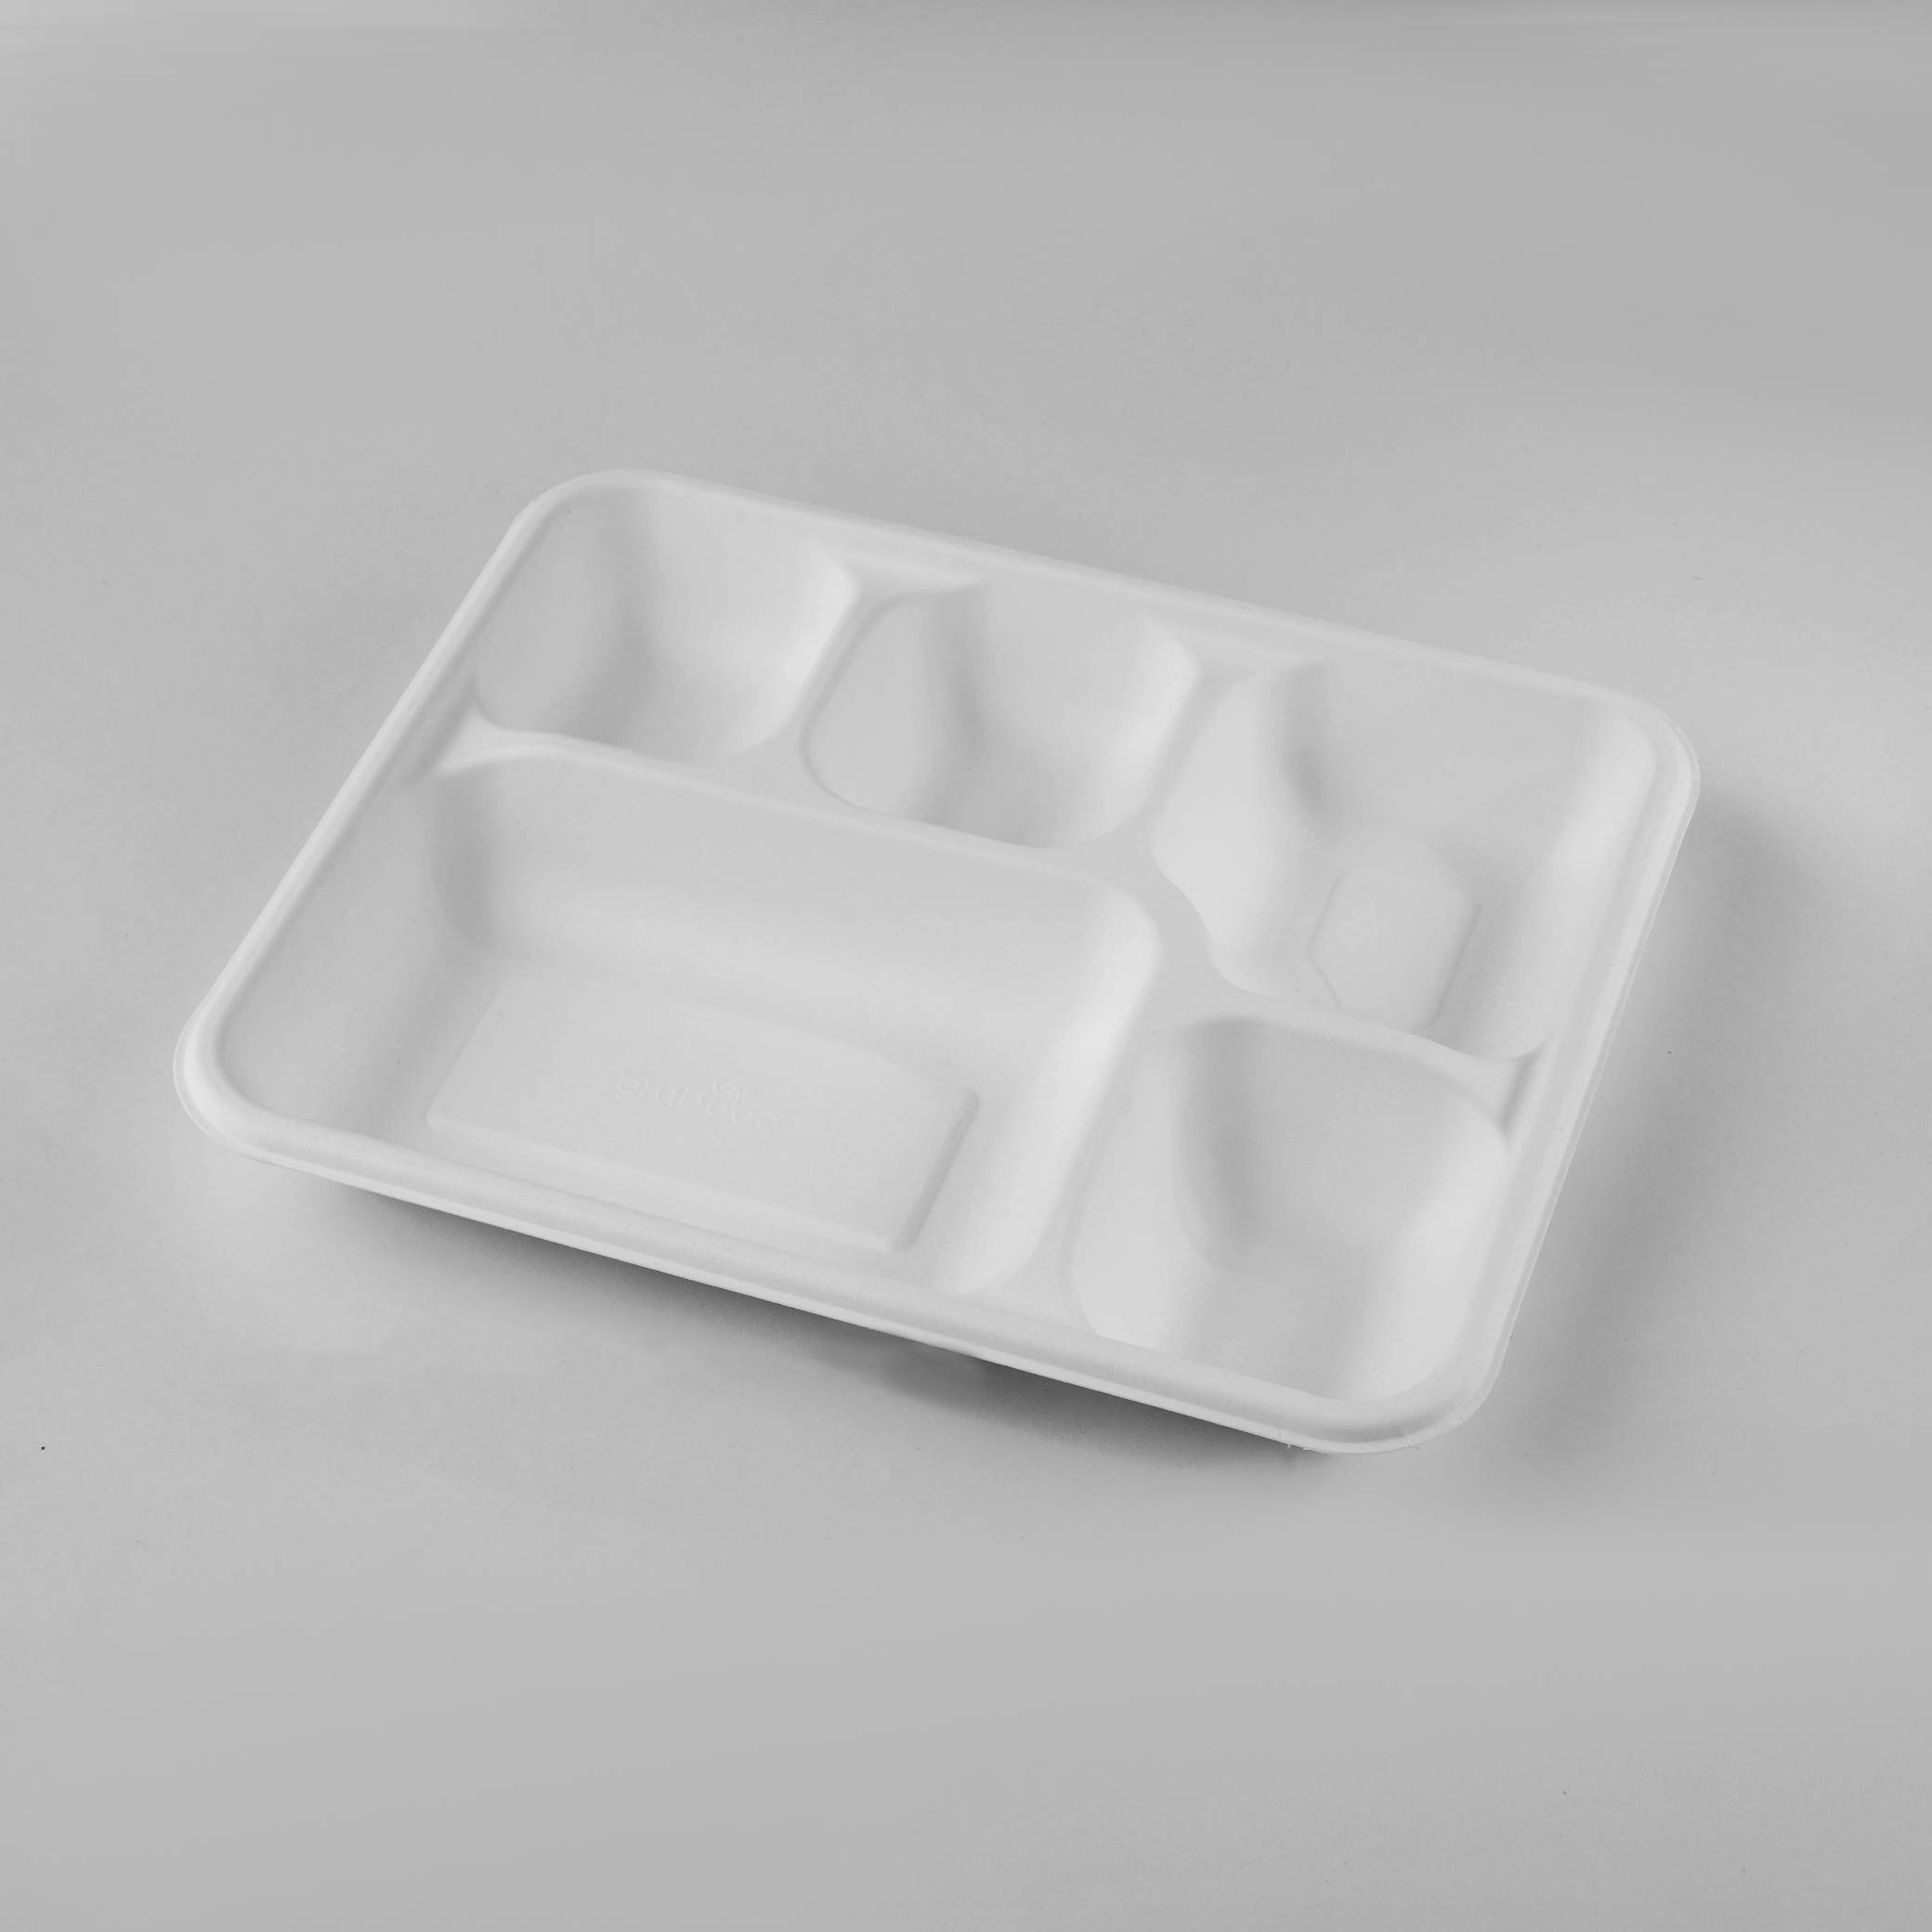 Meal Tray 5CP with Lid - Goeco Global, Bagaase Tableware